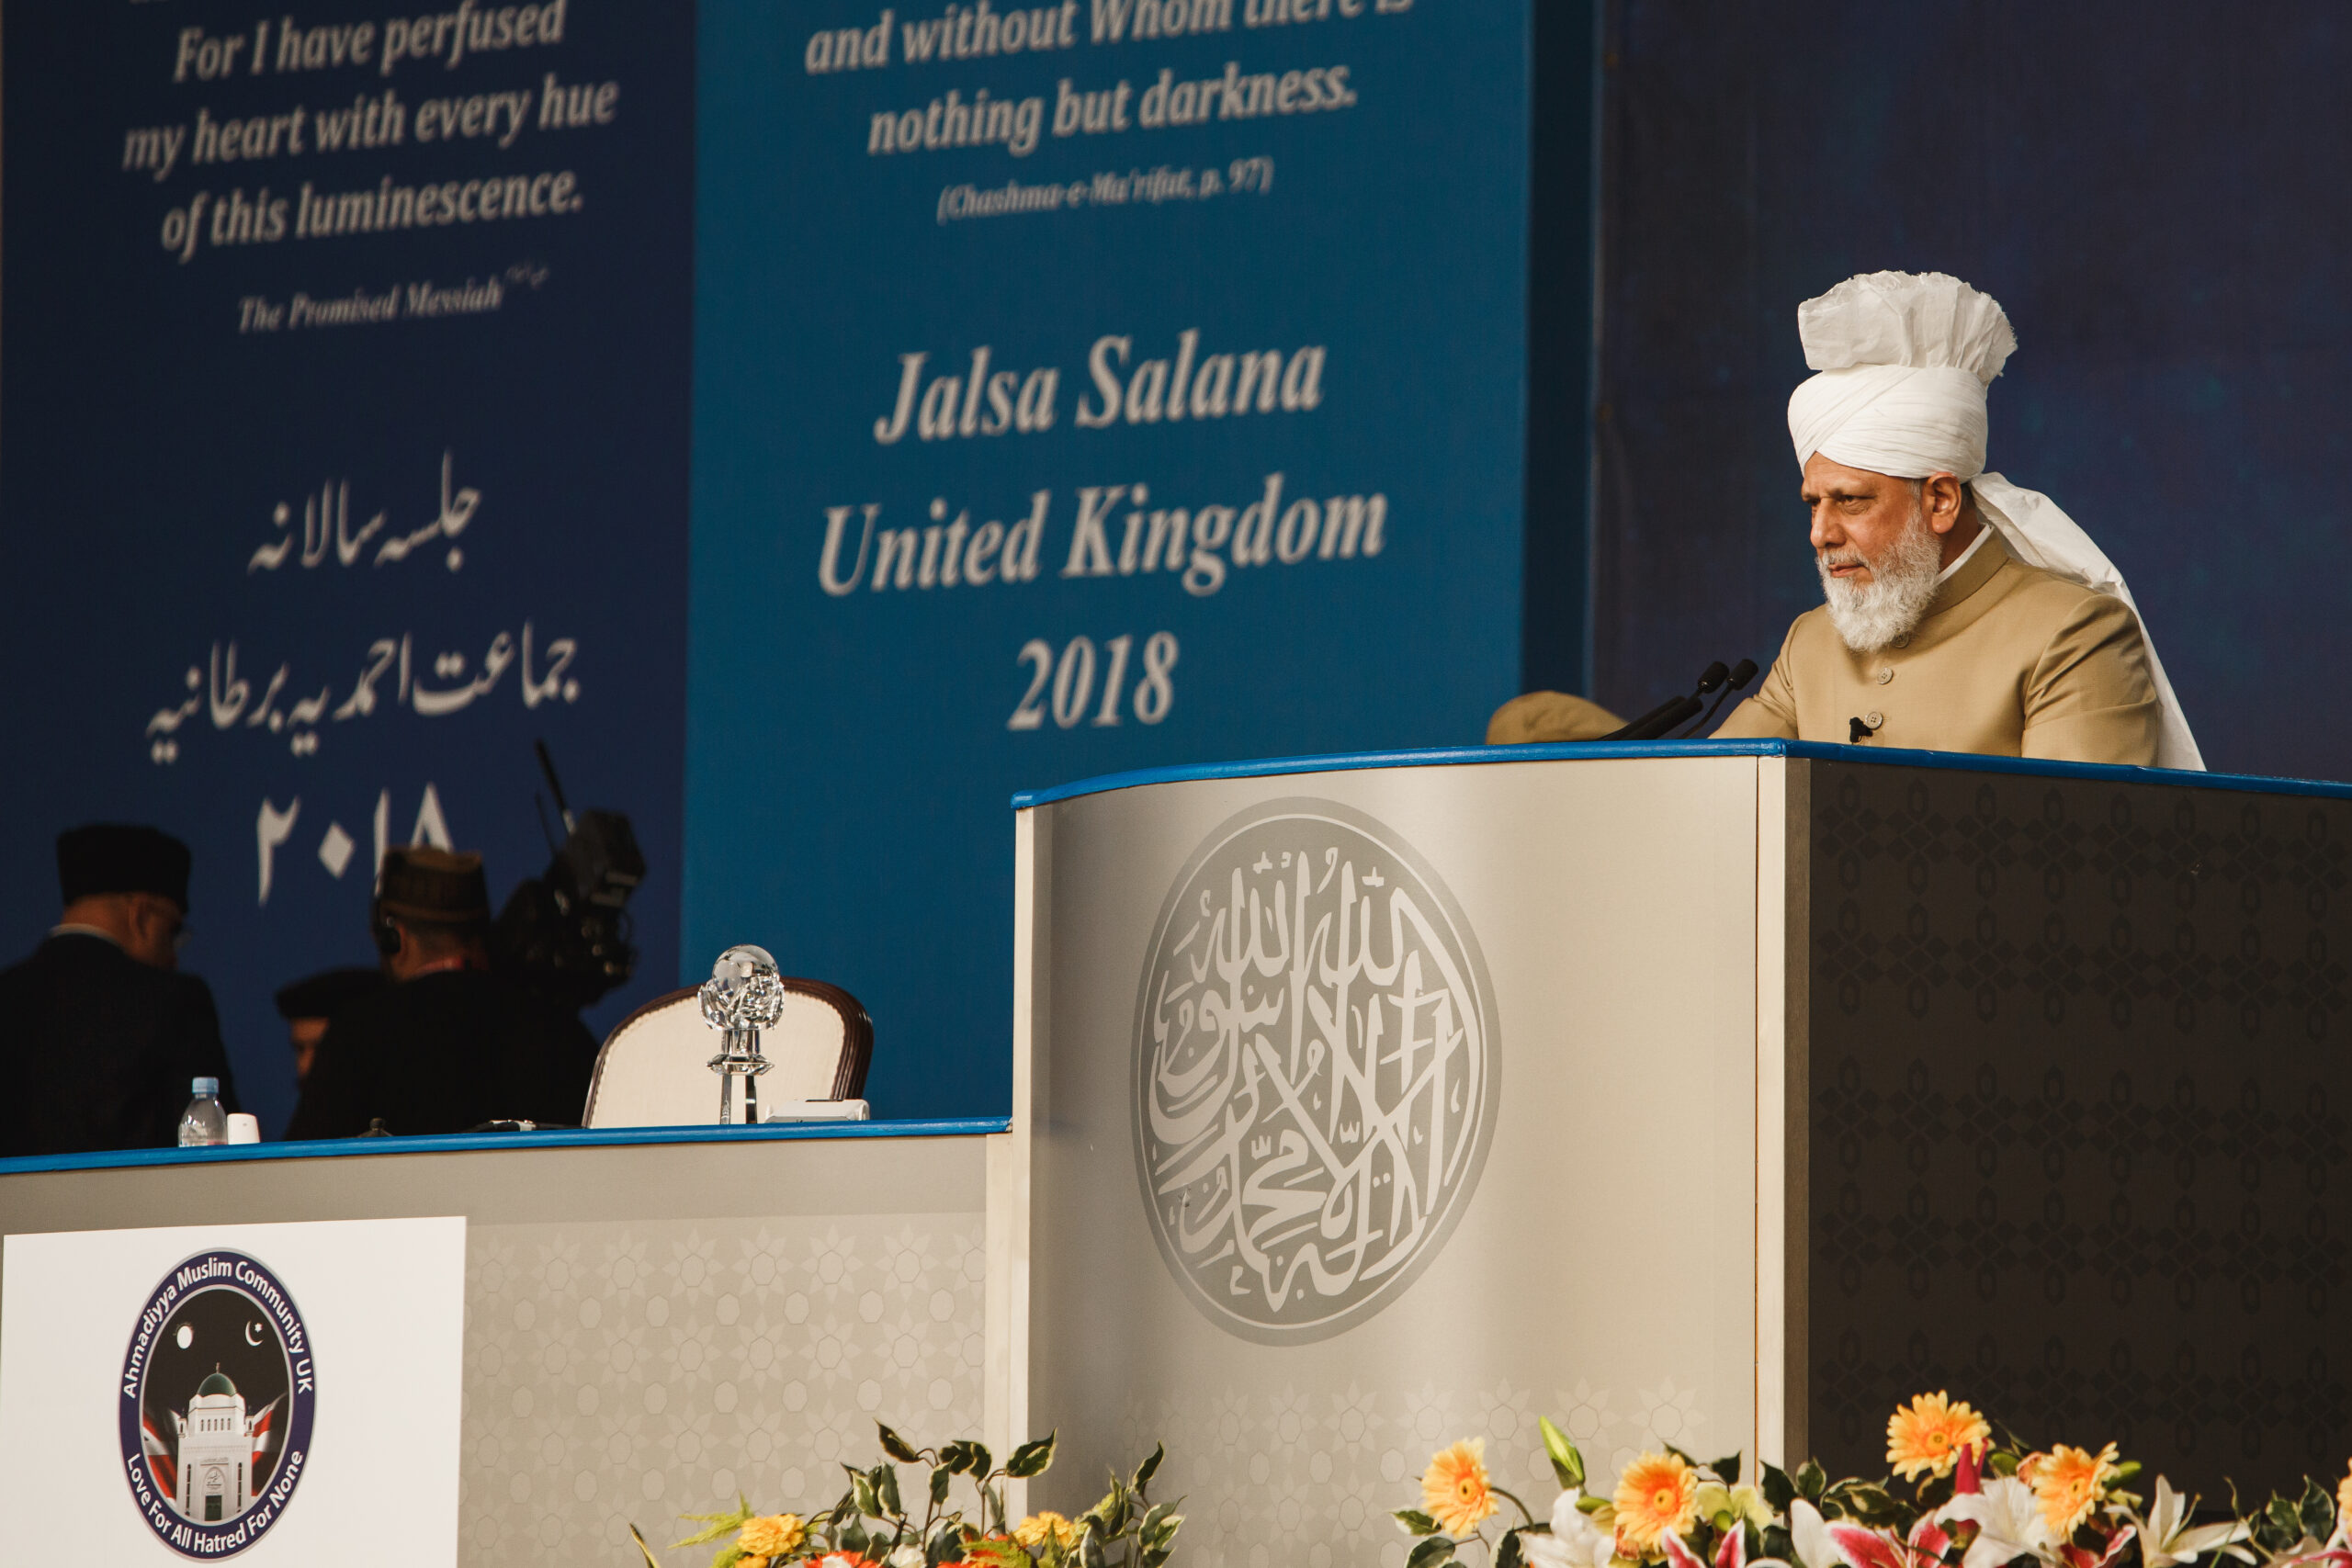 More than 30,000 Muslims ‘seek to make a difference’ at UK’s largest Islamic conference